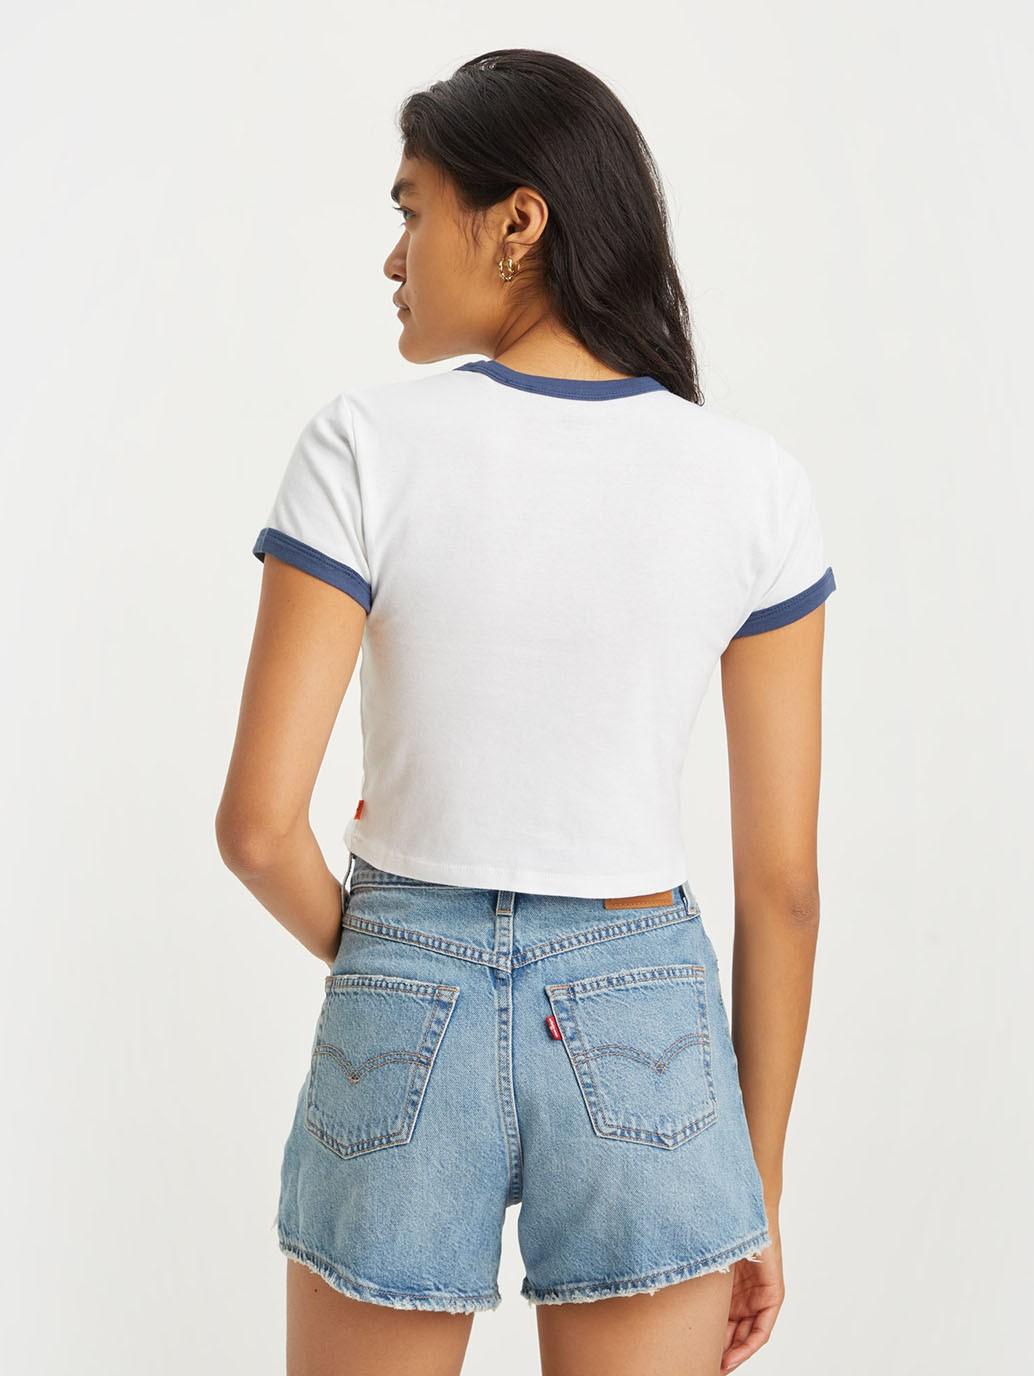 Buy Levis® Womens Graphic Ringer Mini Tee Levis® Official Online Store Ph 1953